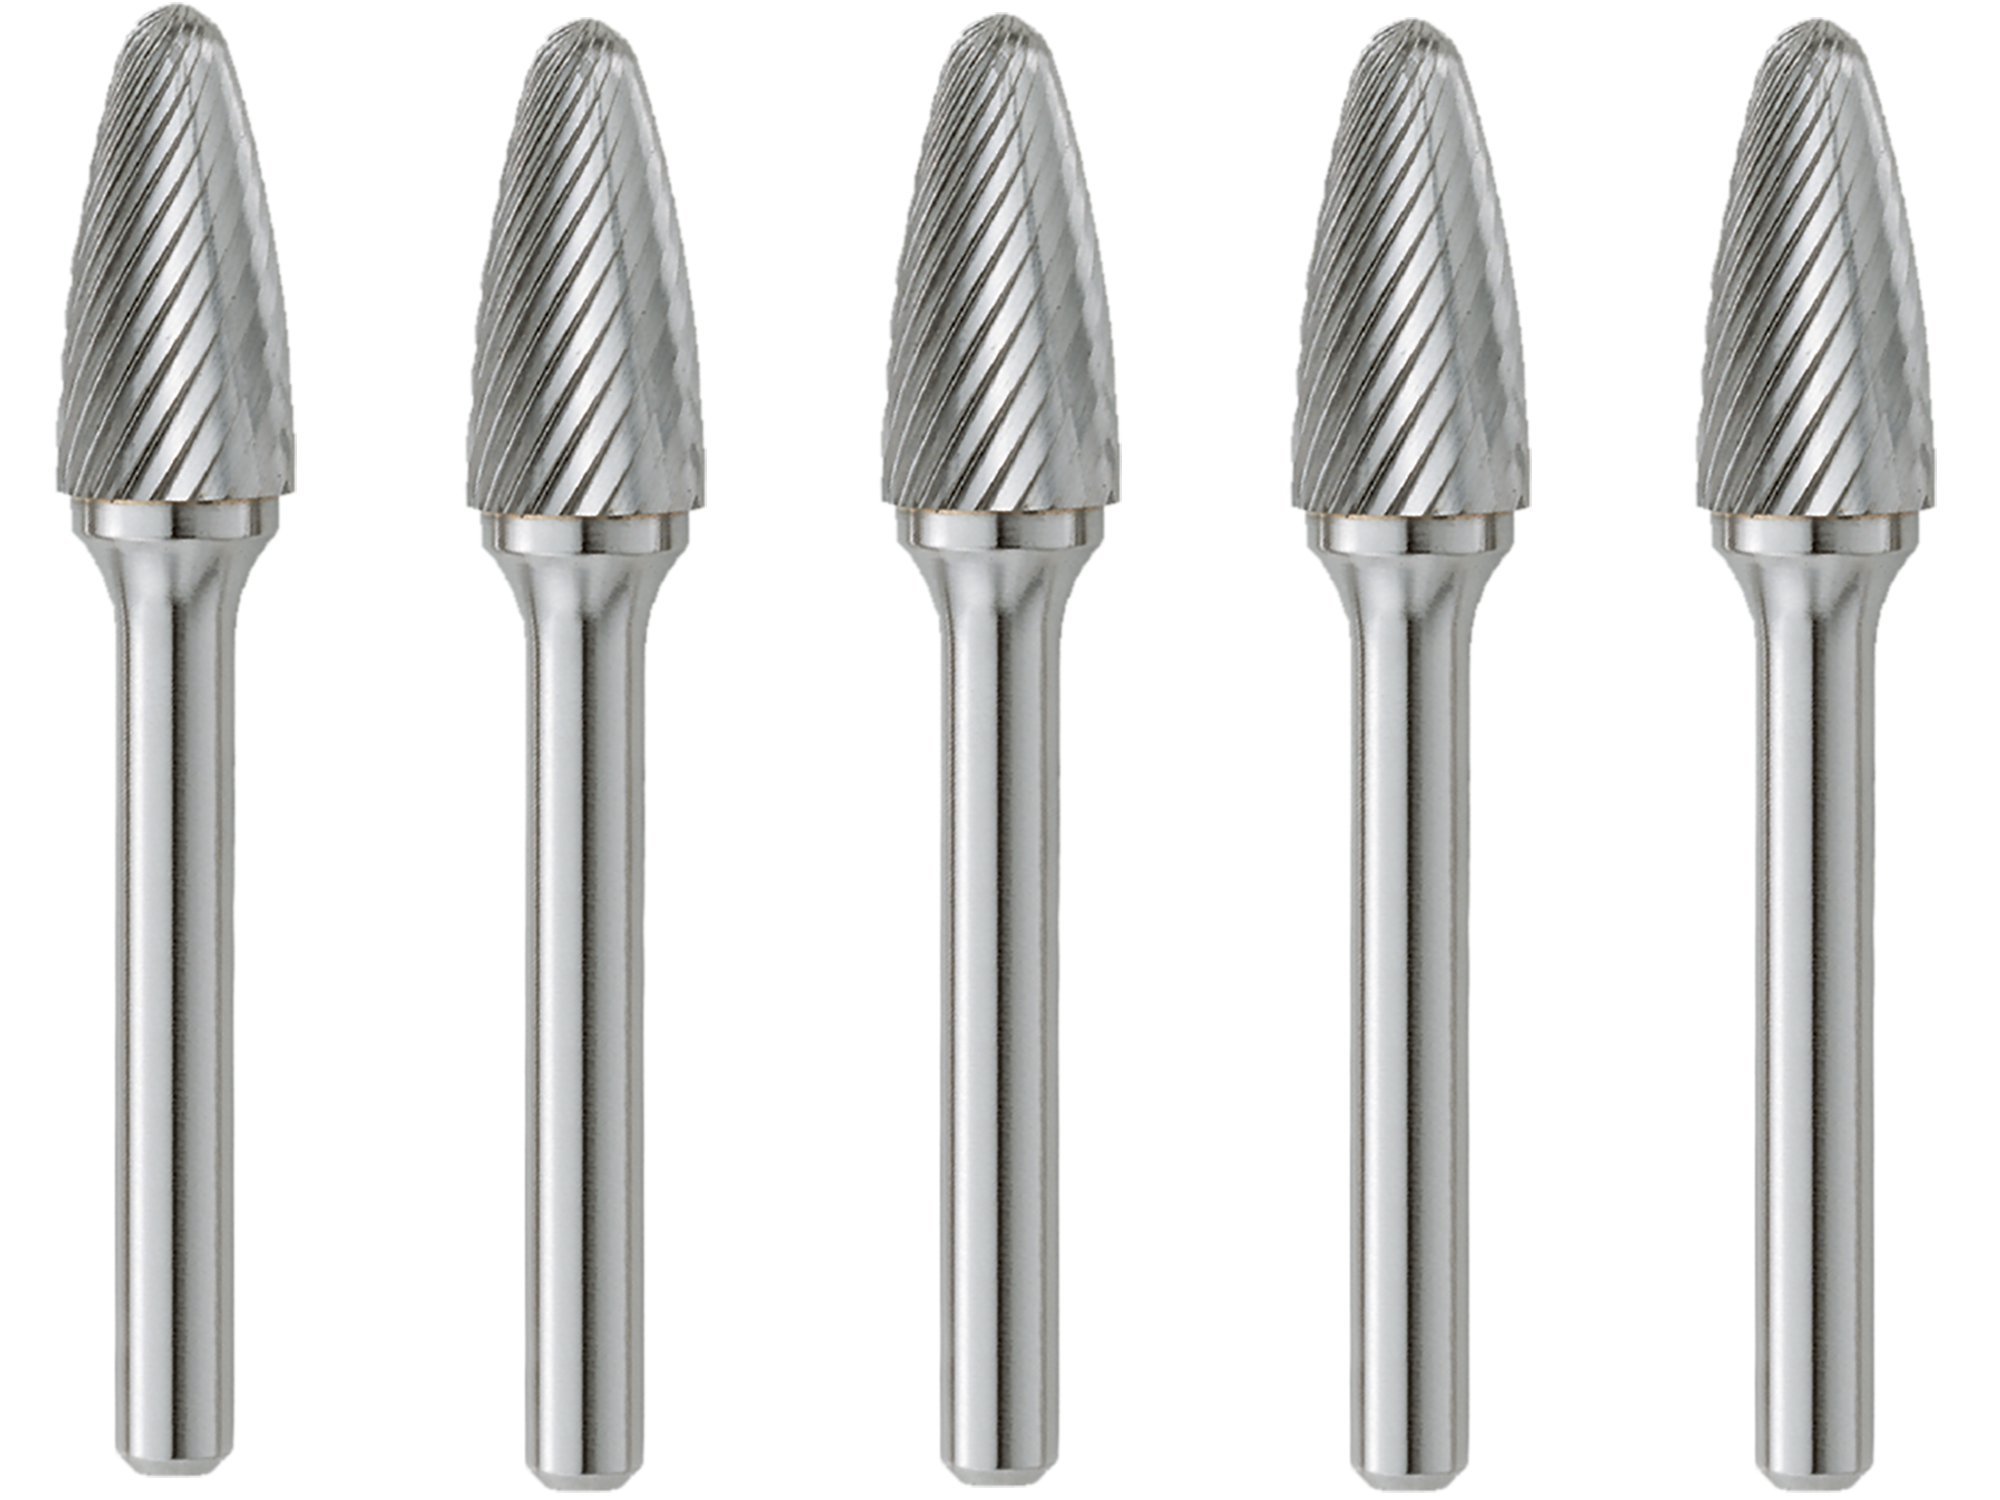 SF-14 Burr (5 Pack) 3/4" x 1-1/4" Cut Length x 2-1/2" OAL on 1/4" Shanks - The End Mill Store 